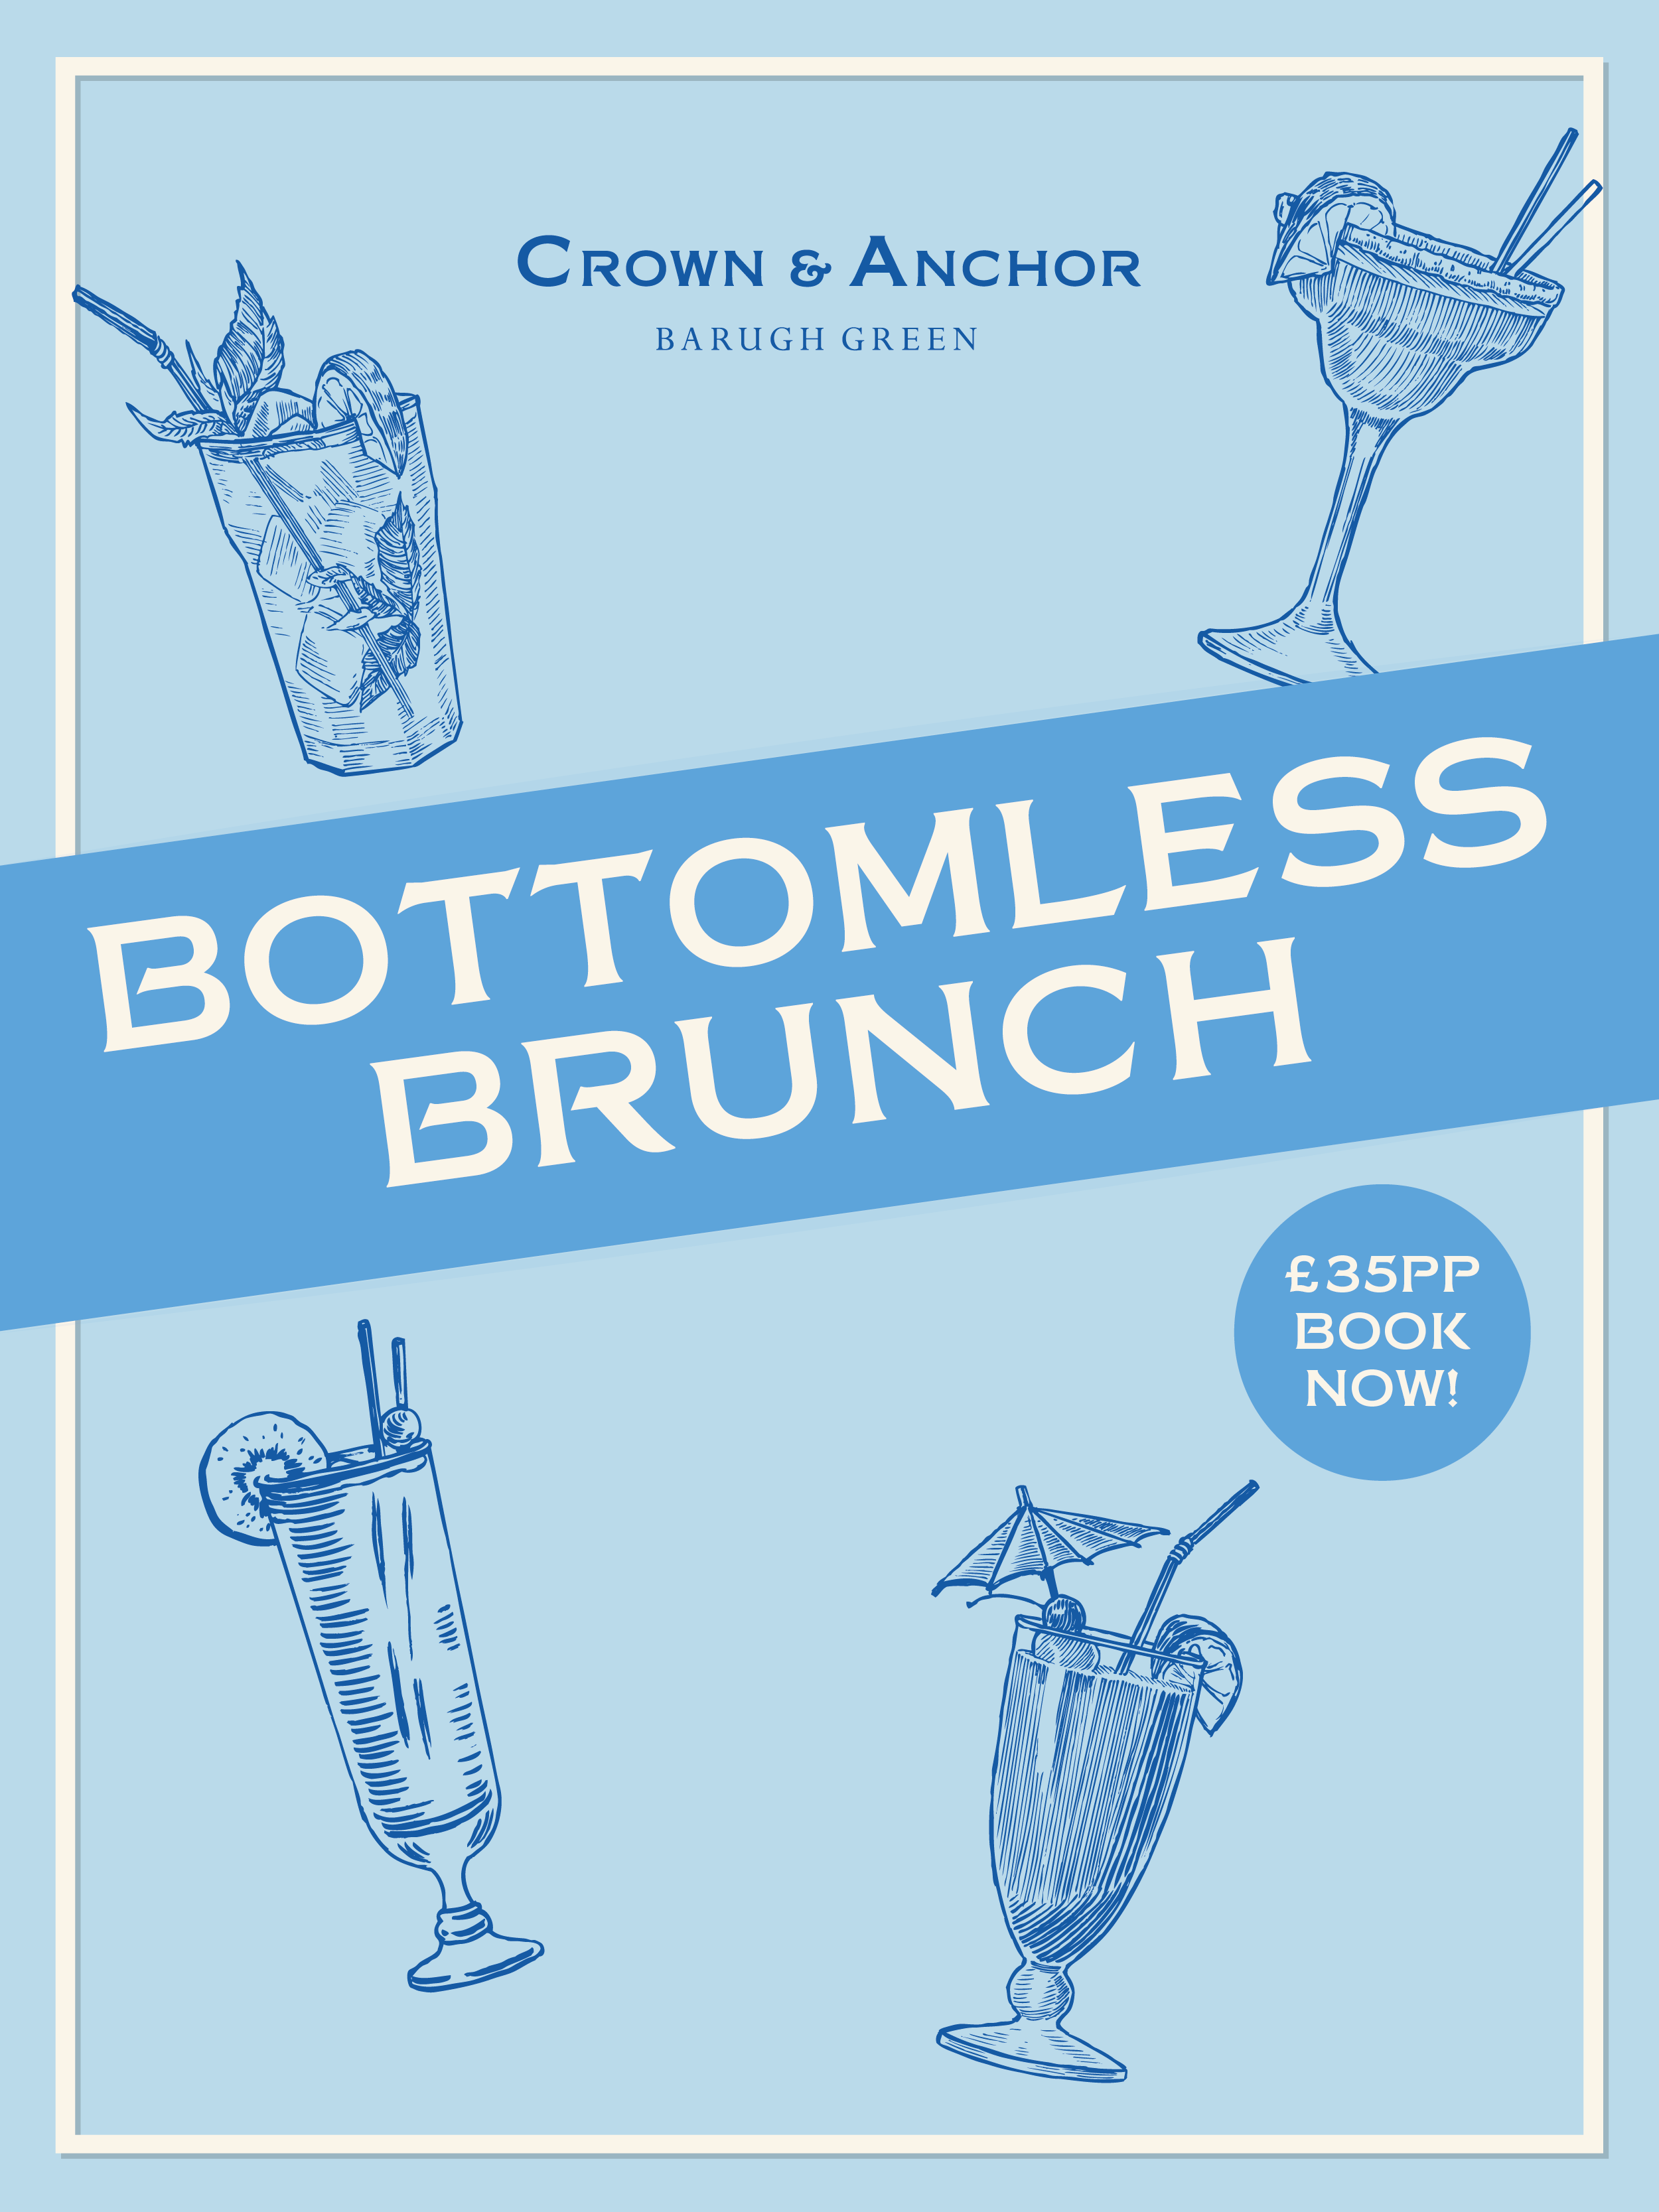 Bottomless Brunch at The Crown & Anchor